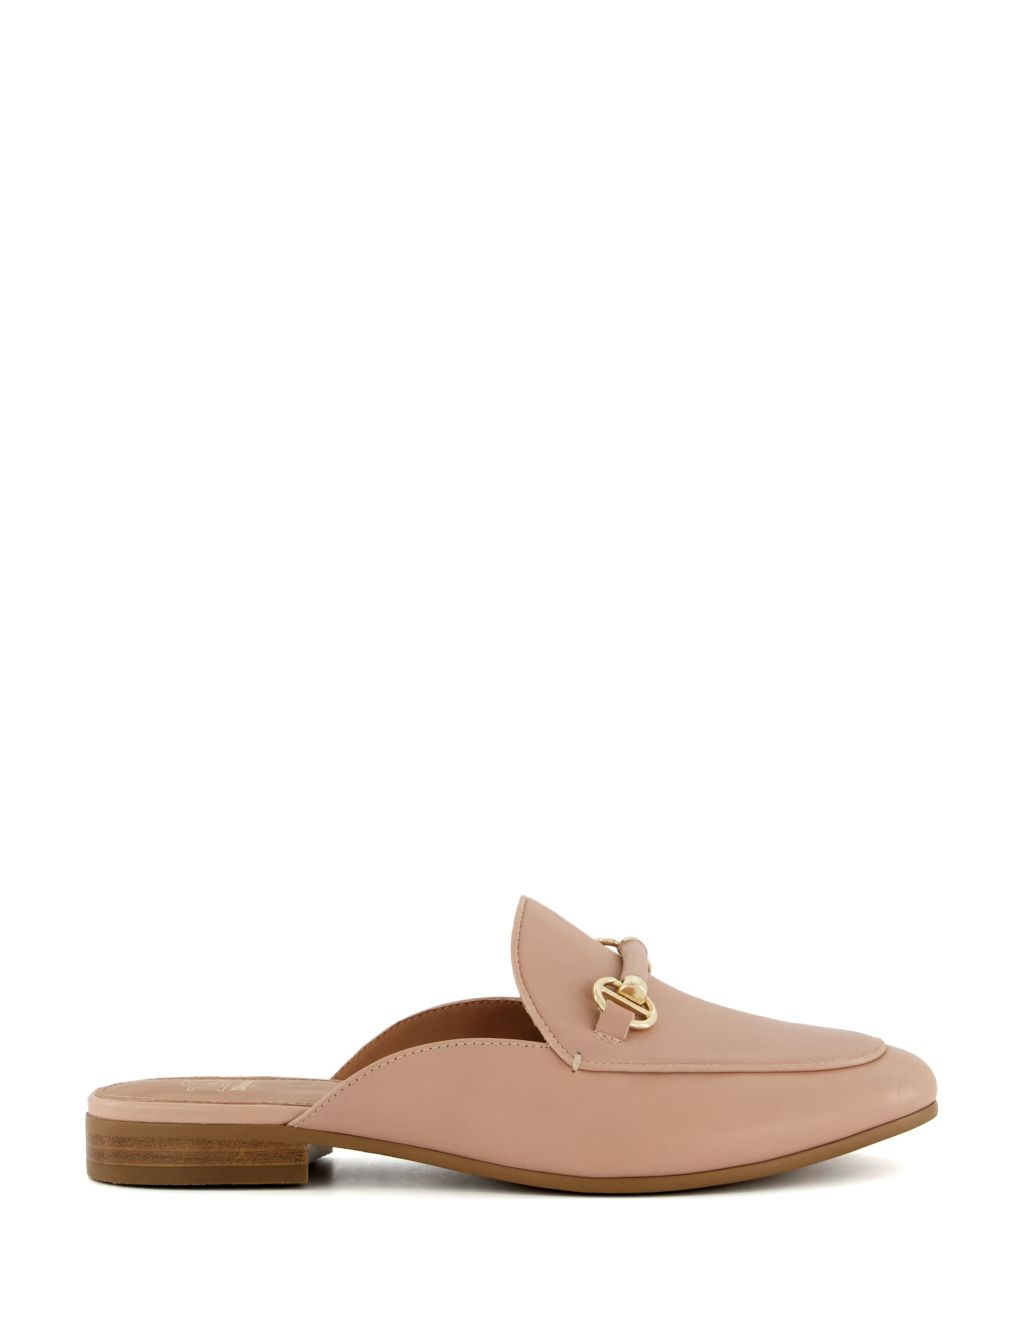 Leather Ring Detail Flat Loafers image 1